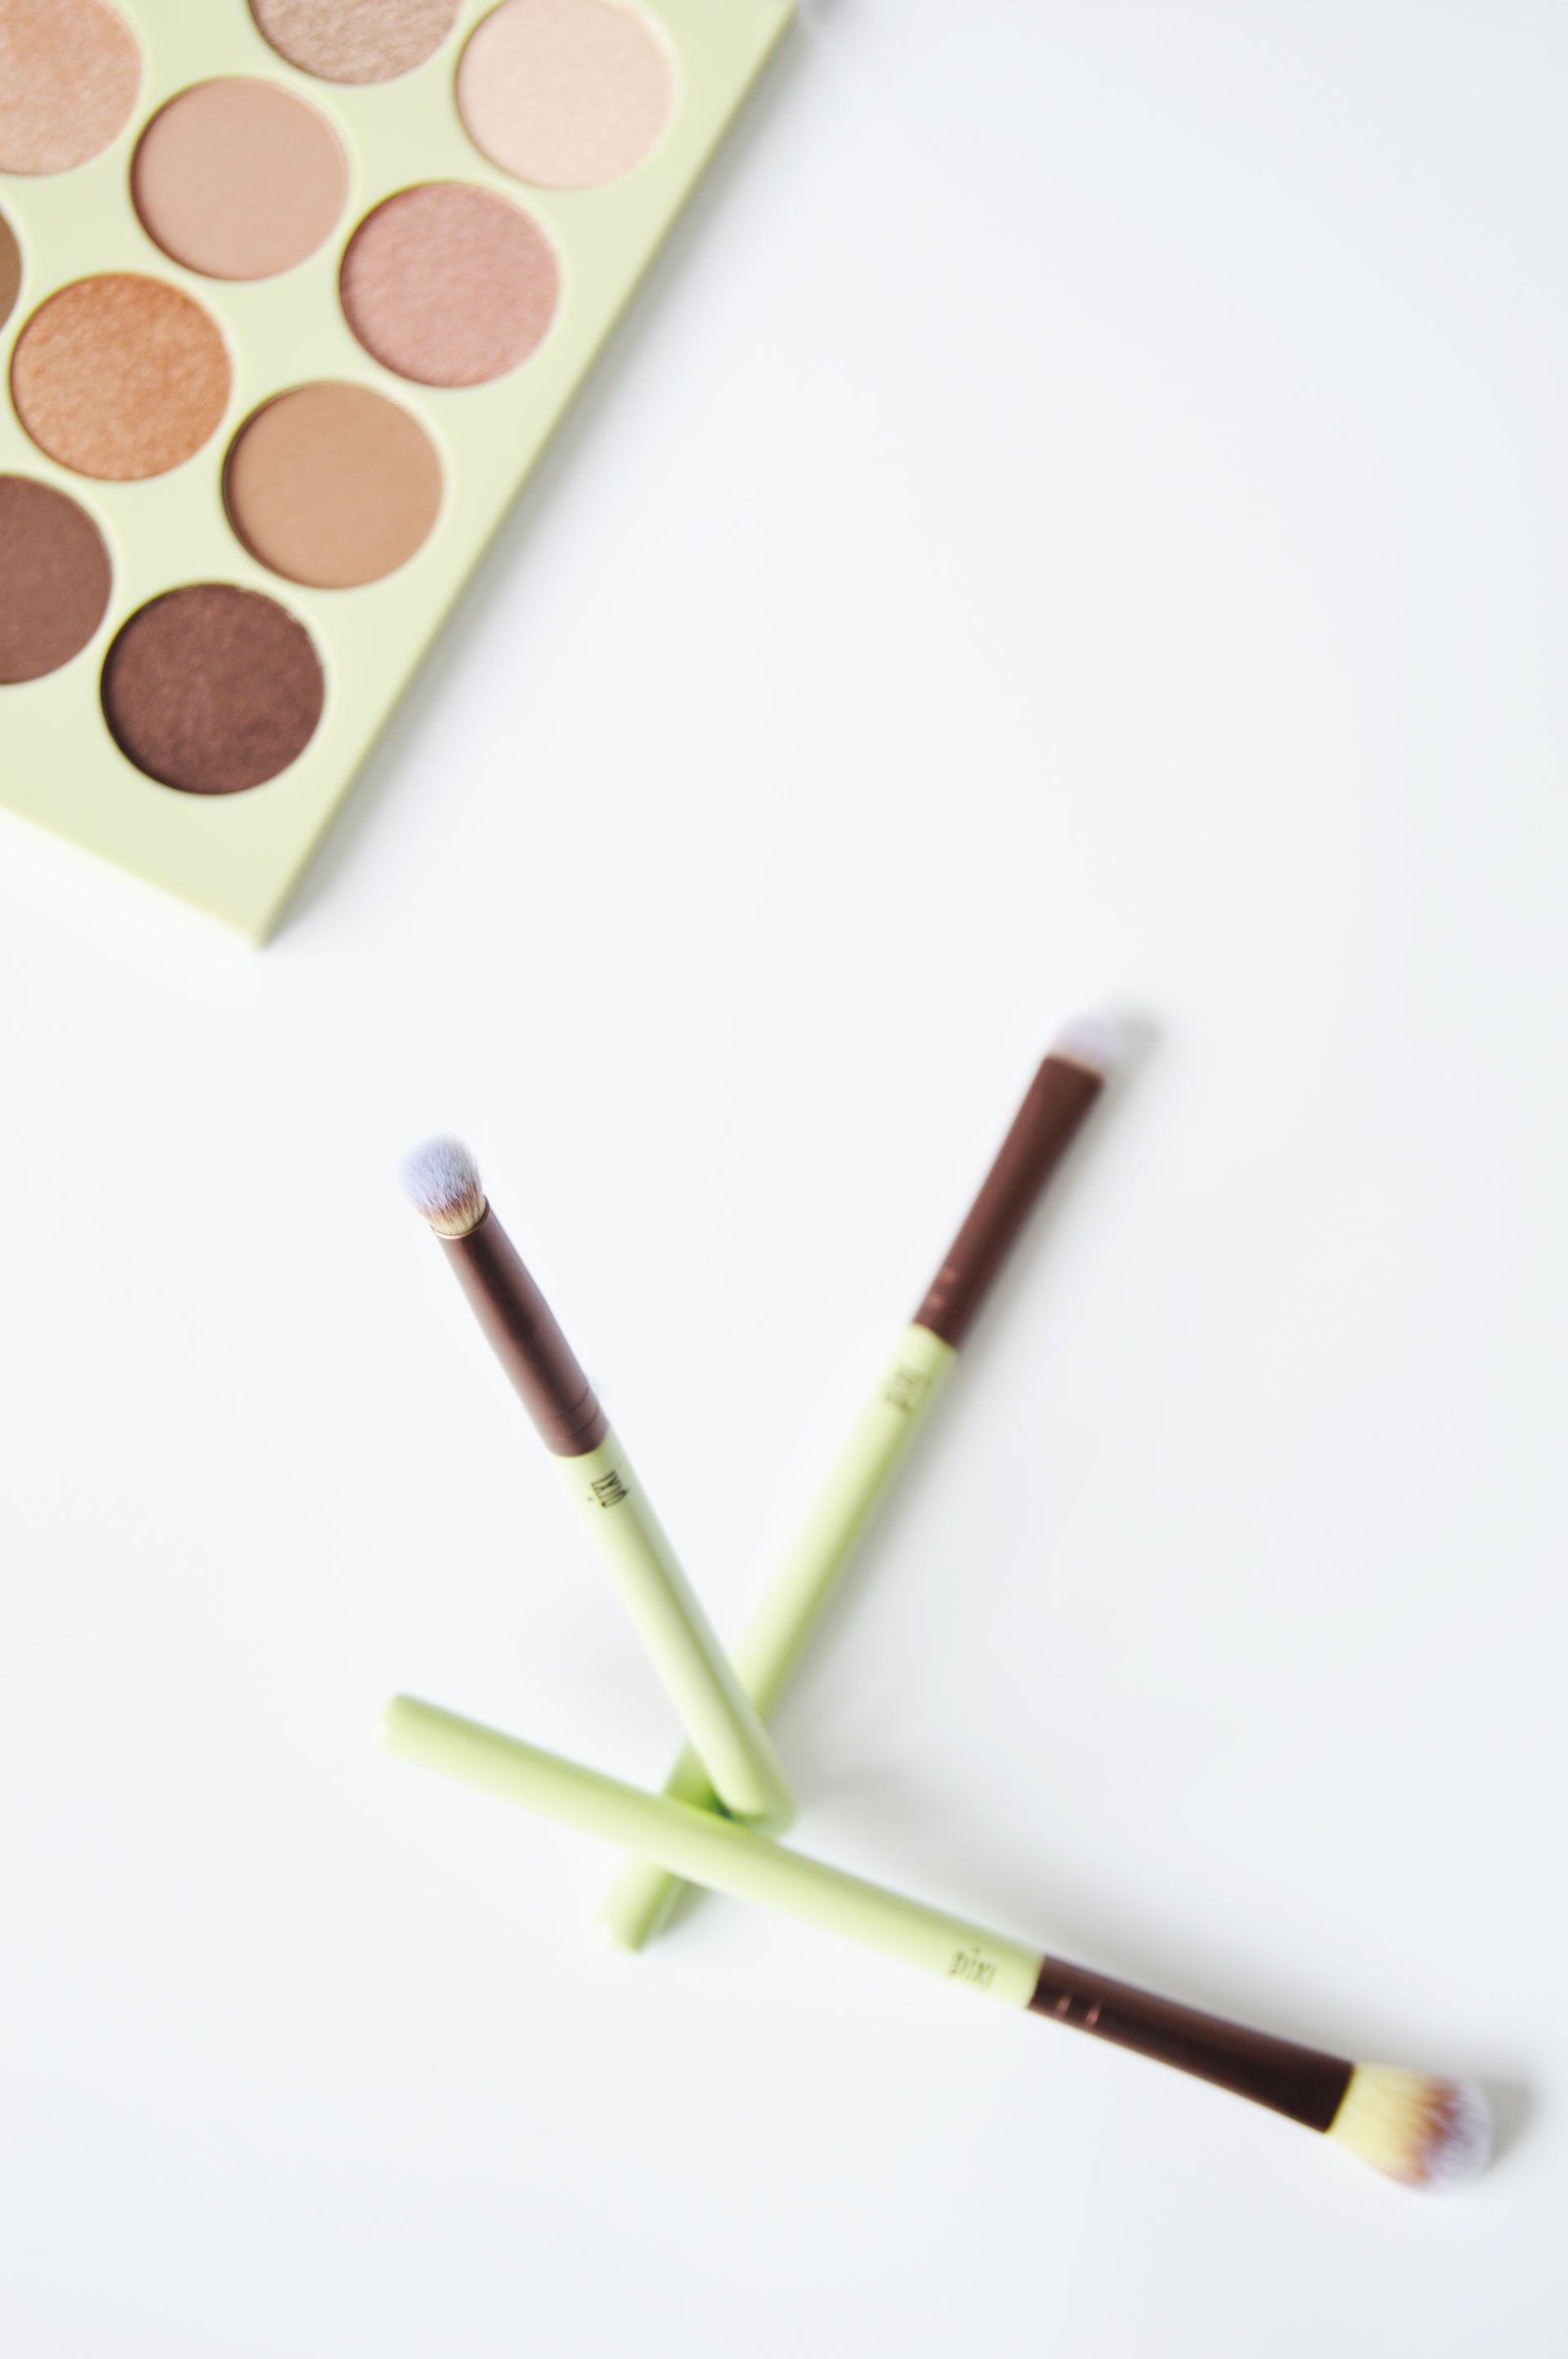 Pixi Beauty Natural Beauty and Reflex Light Palettes and Brush Review